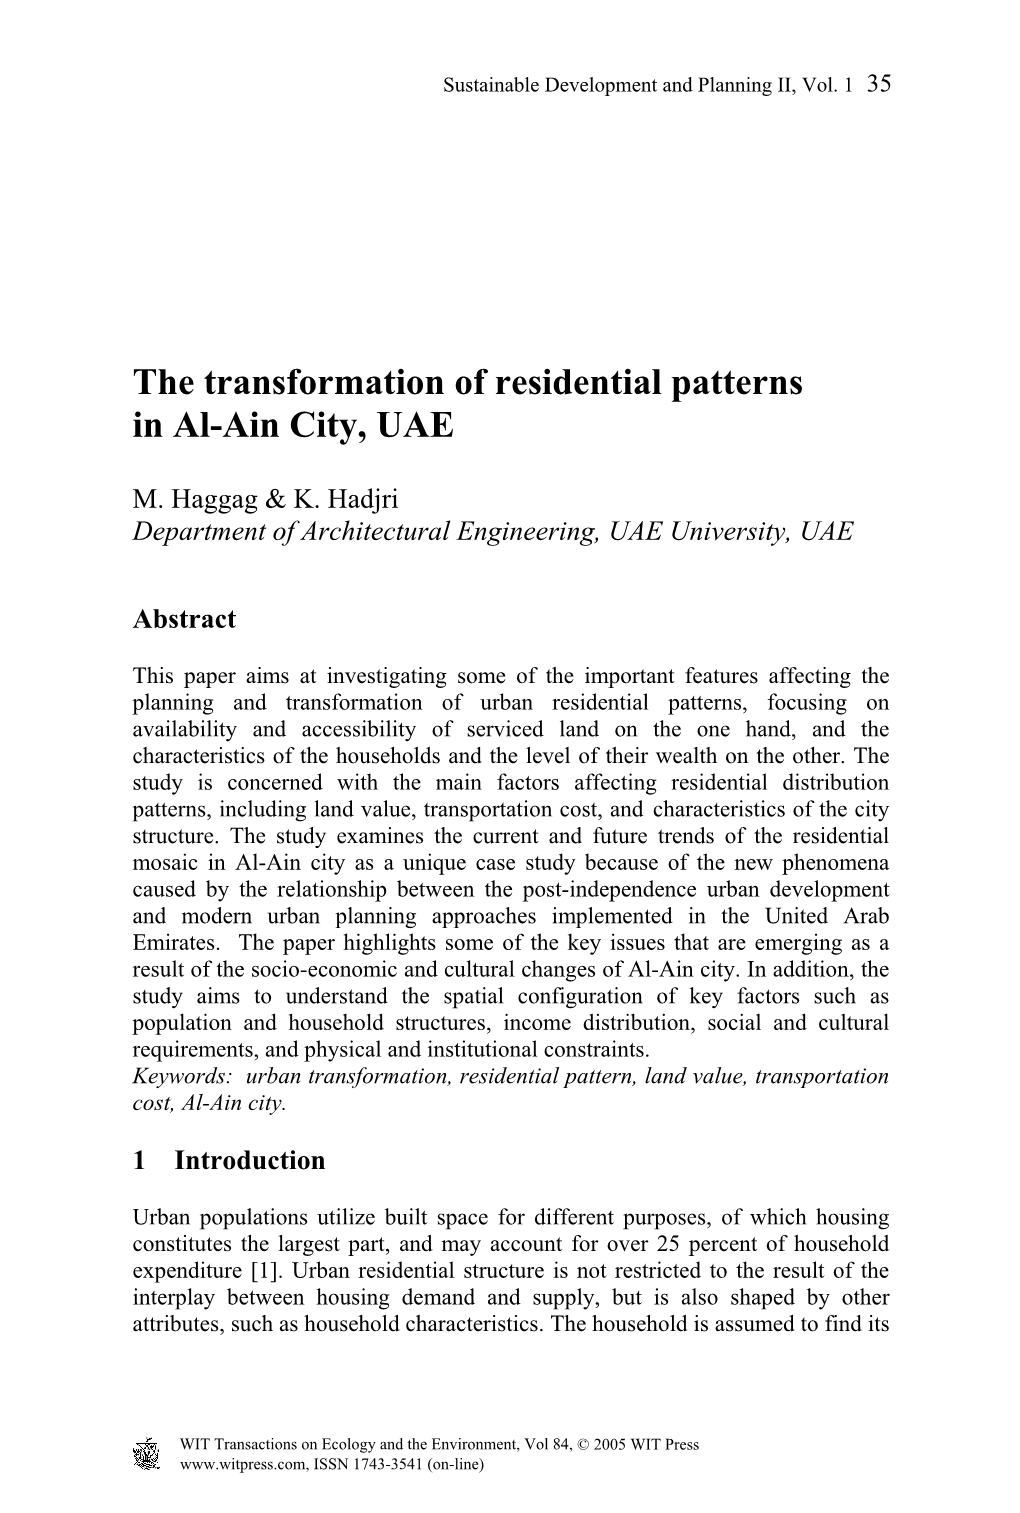 The Transformation of Residential Patterns in Al-Ain City, UAE